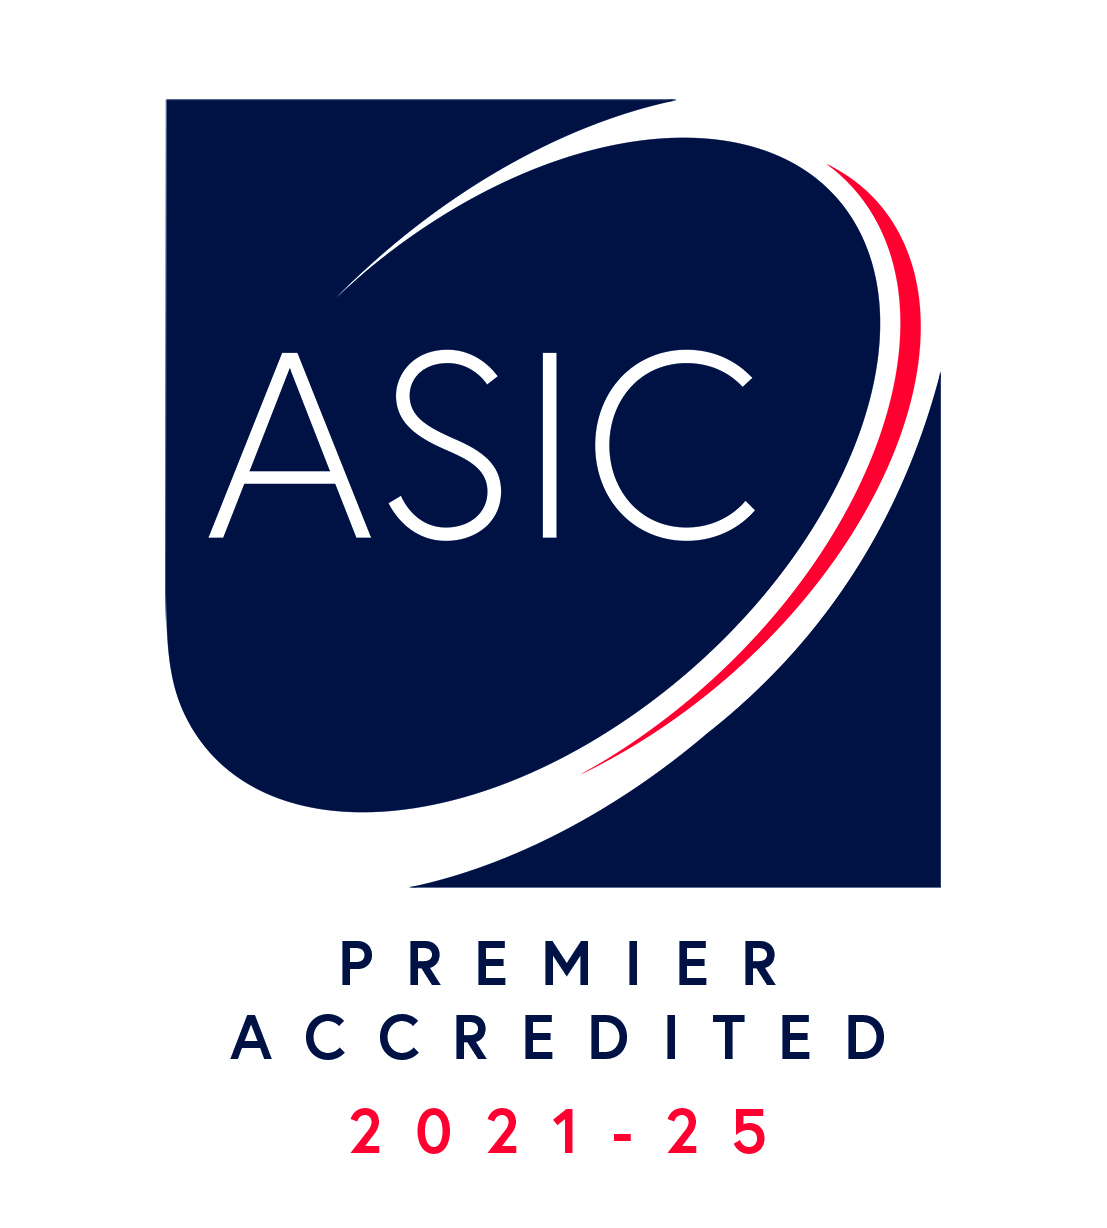 ASIC Accredited 2021 to 2025